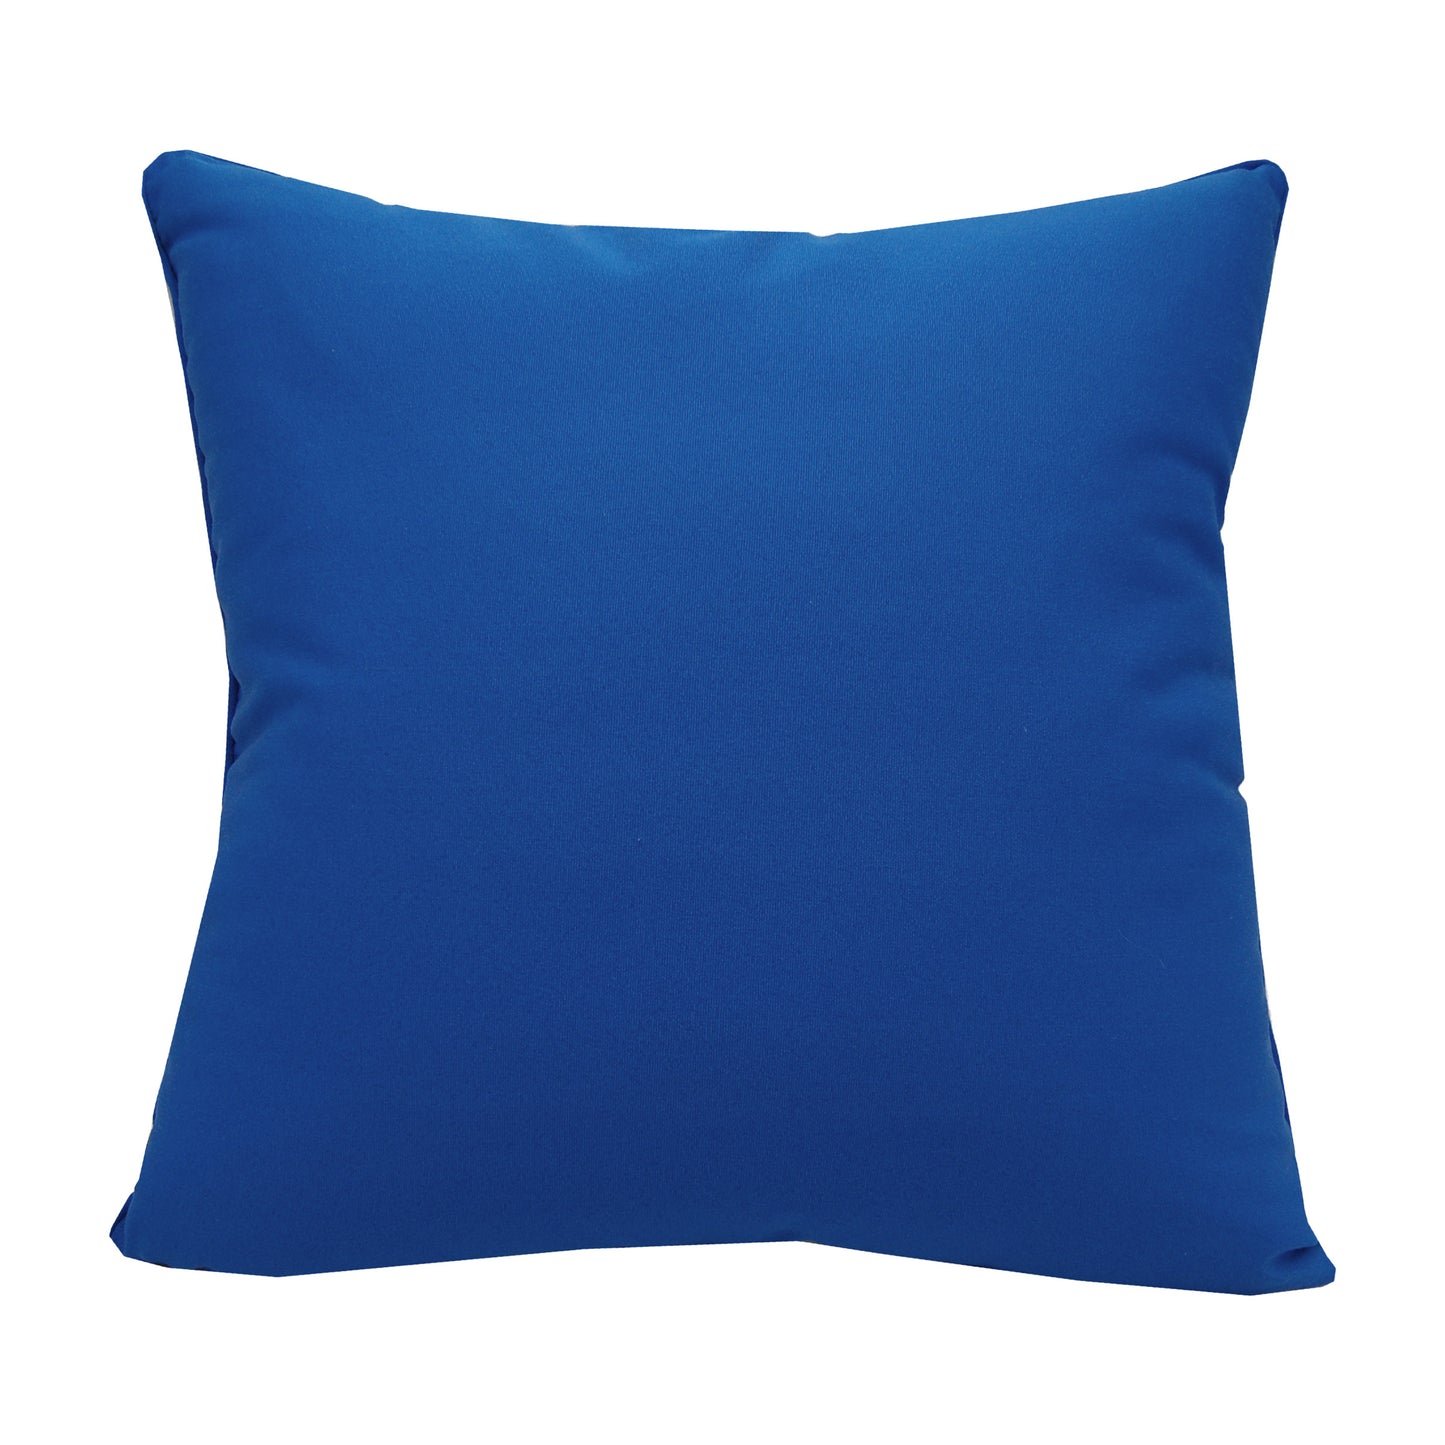 Solid blue fabric; back of the Blue Agave Indoor Outdoor Pillow.